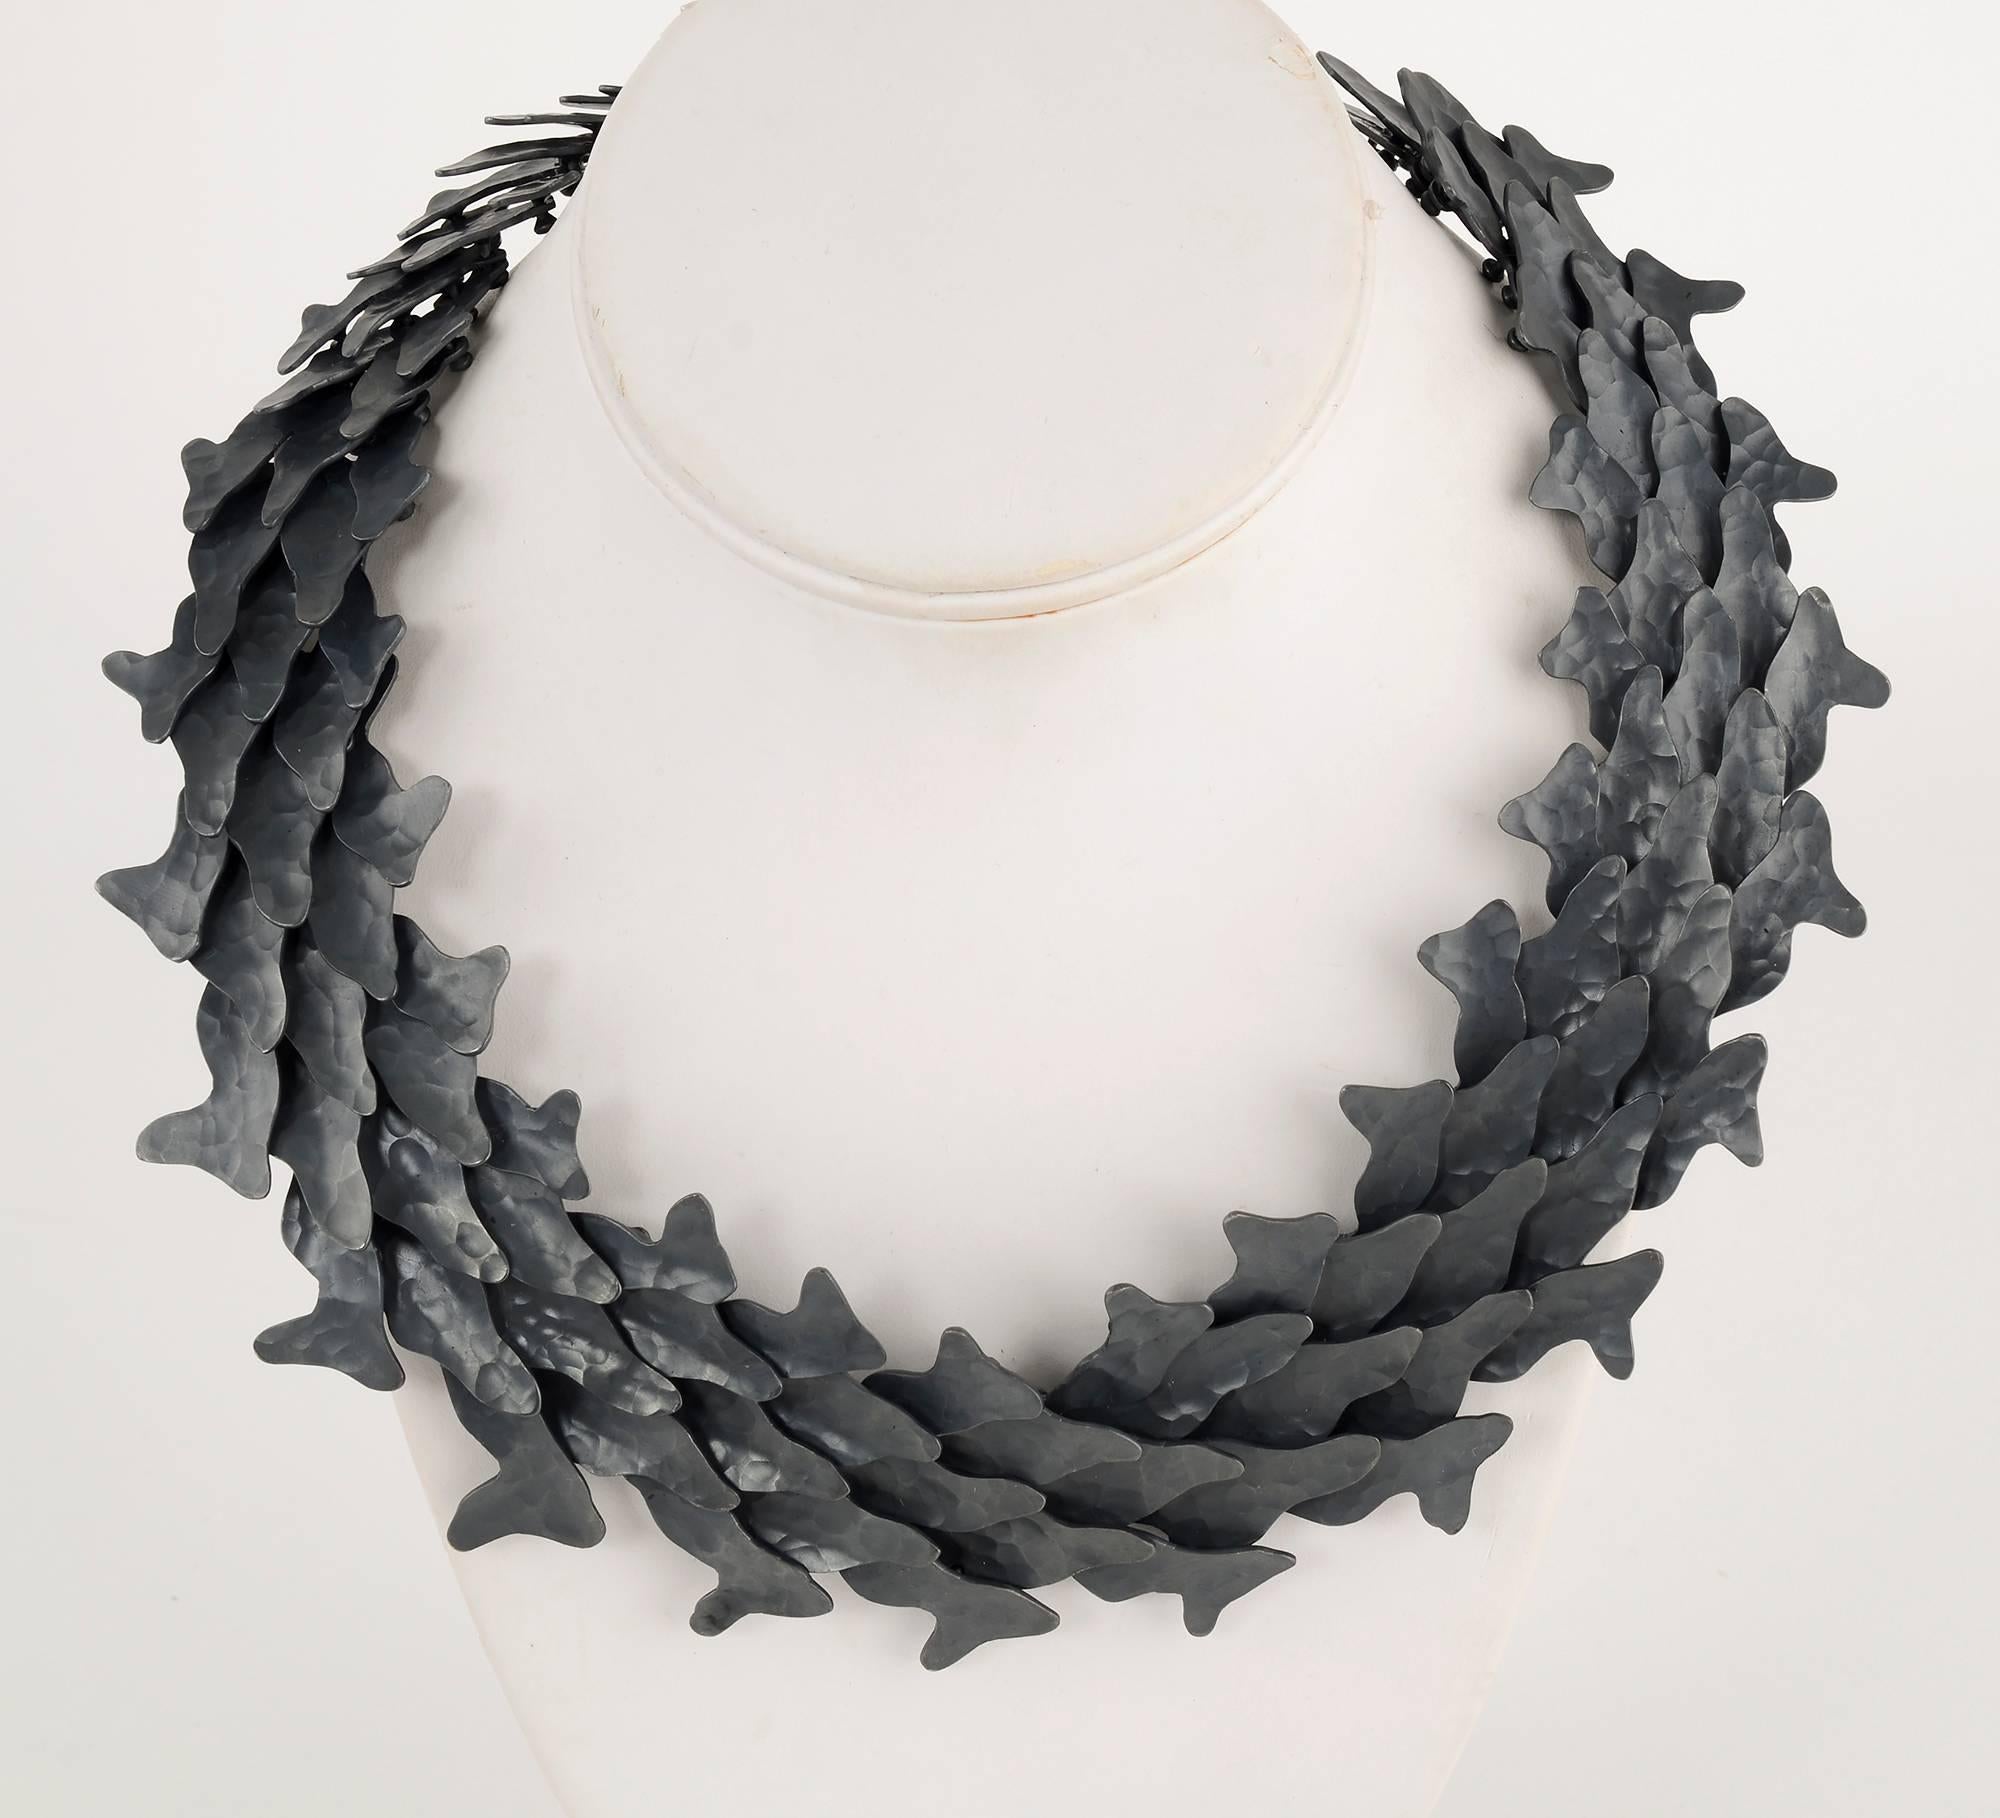 
Stunning hammered and oxidized silver necklace by Mexican designer, Eduardo Herrera. Herrera's experience as an architect is evident in the masterful creation of a necklace with overlapping links of varying shape and size to create a graceful form